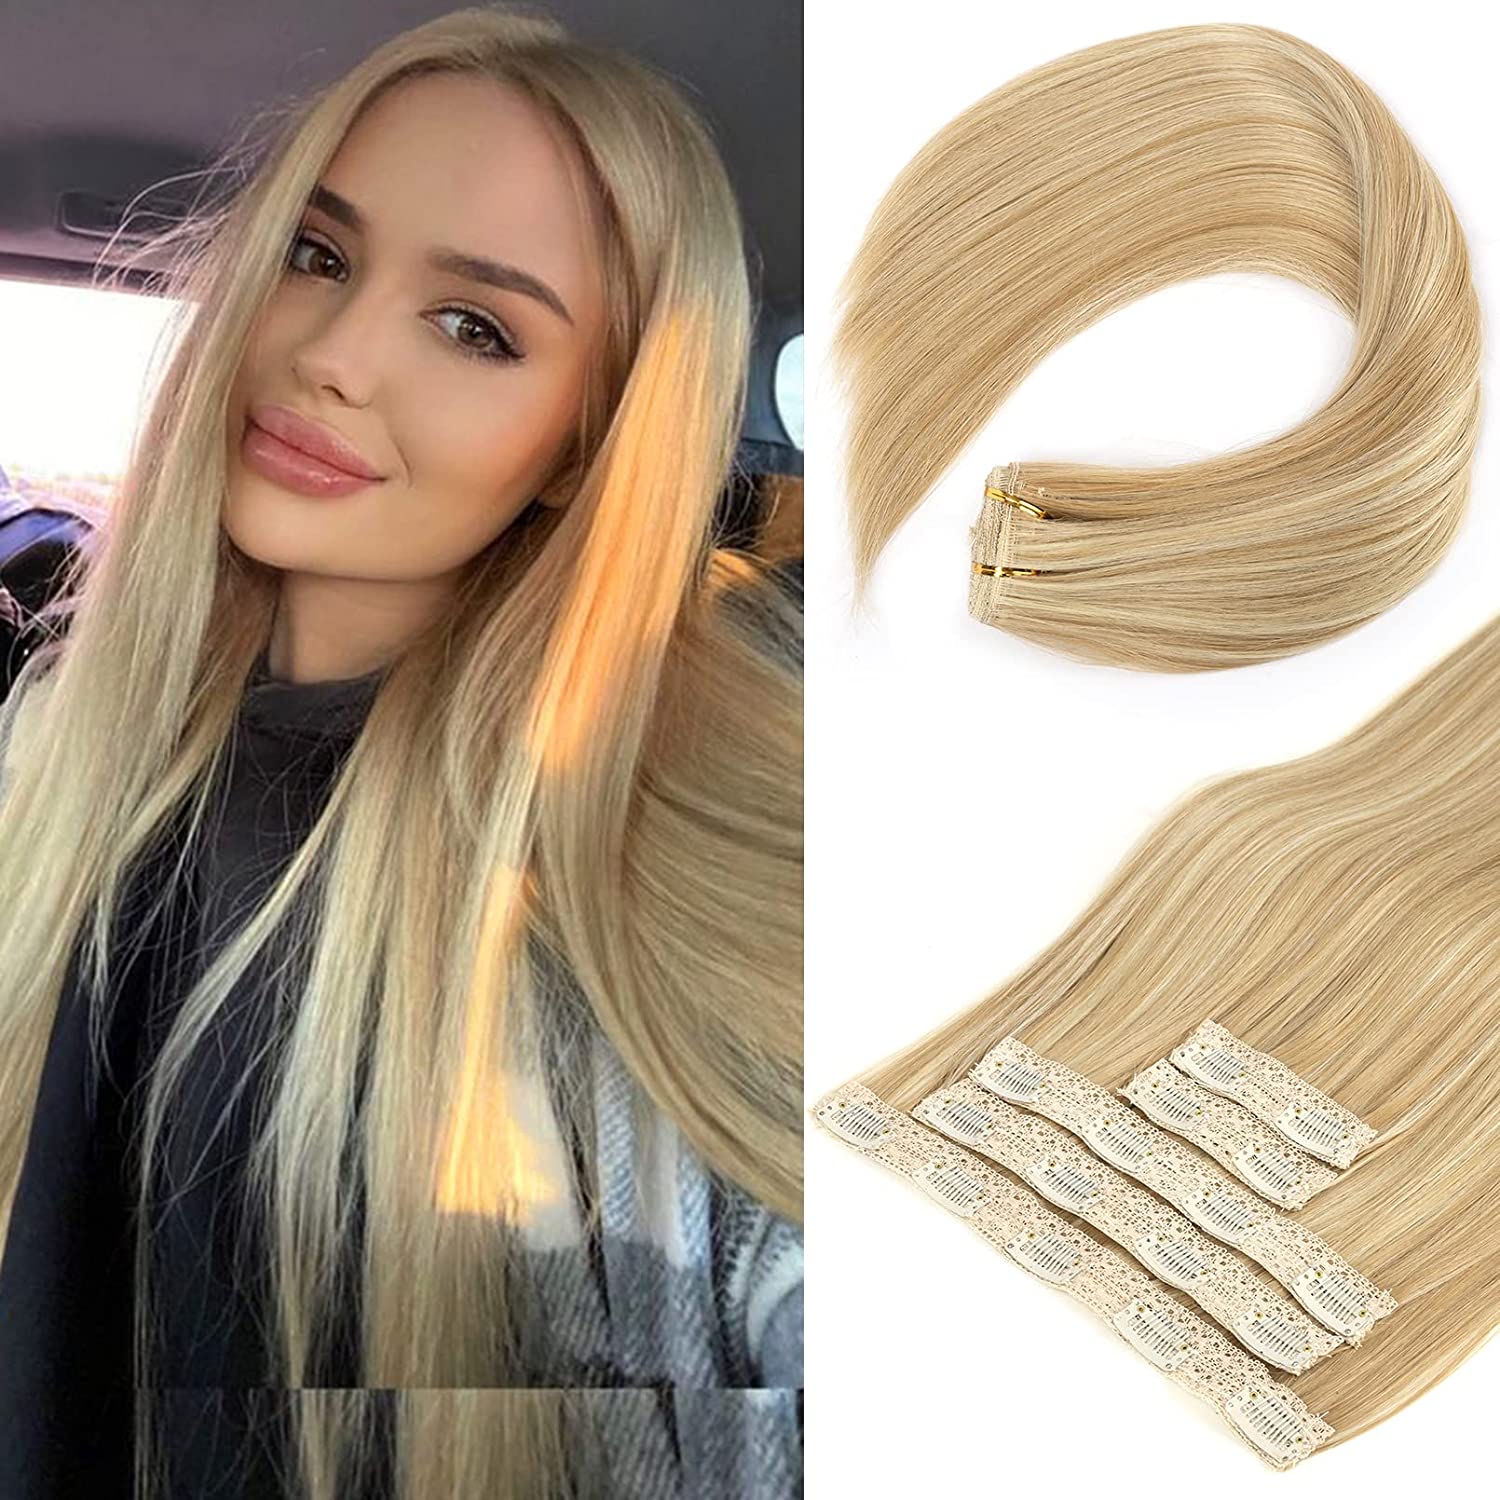 REECHO Clip in Hair Extensions, 24” Hair Extensions 5PCS Thick Long Straight Lace Weft Lightweight Synthetic Hairpieces for Women